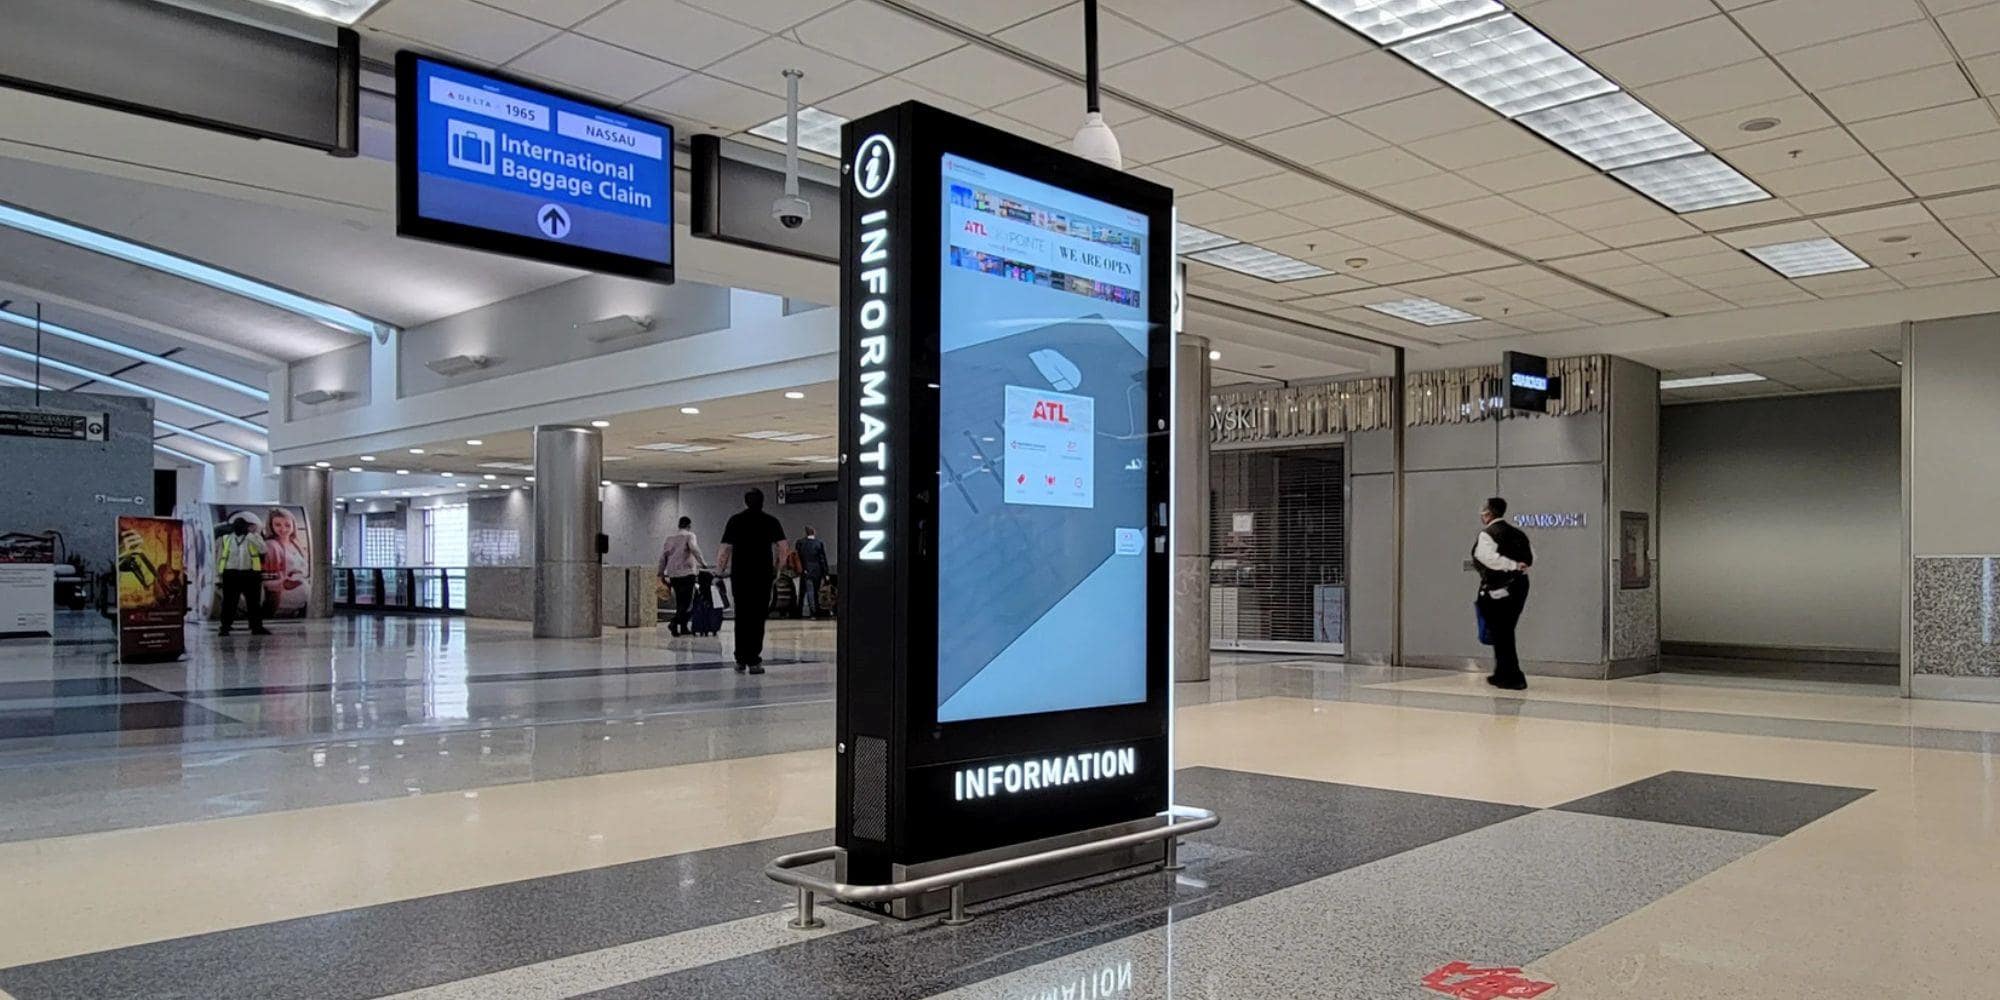 The Impact of digital directories in airports.